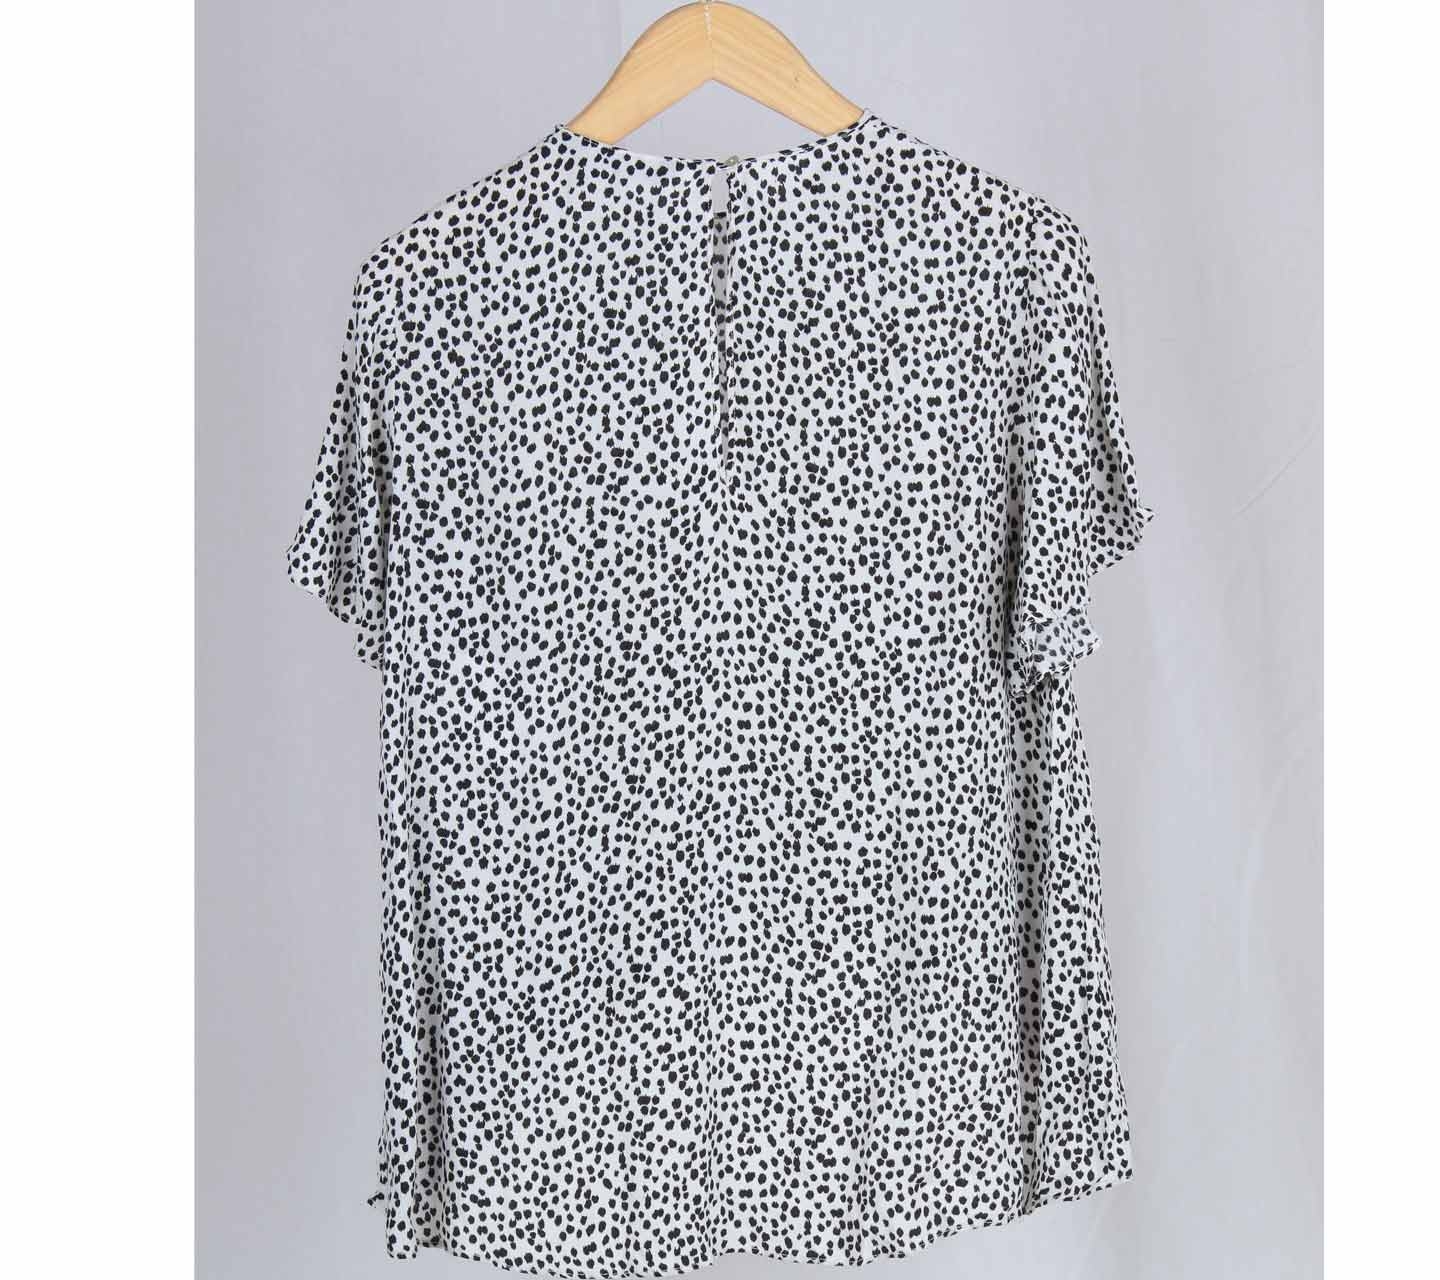 Zara Black And White Patterned Blouse